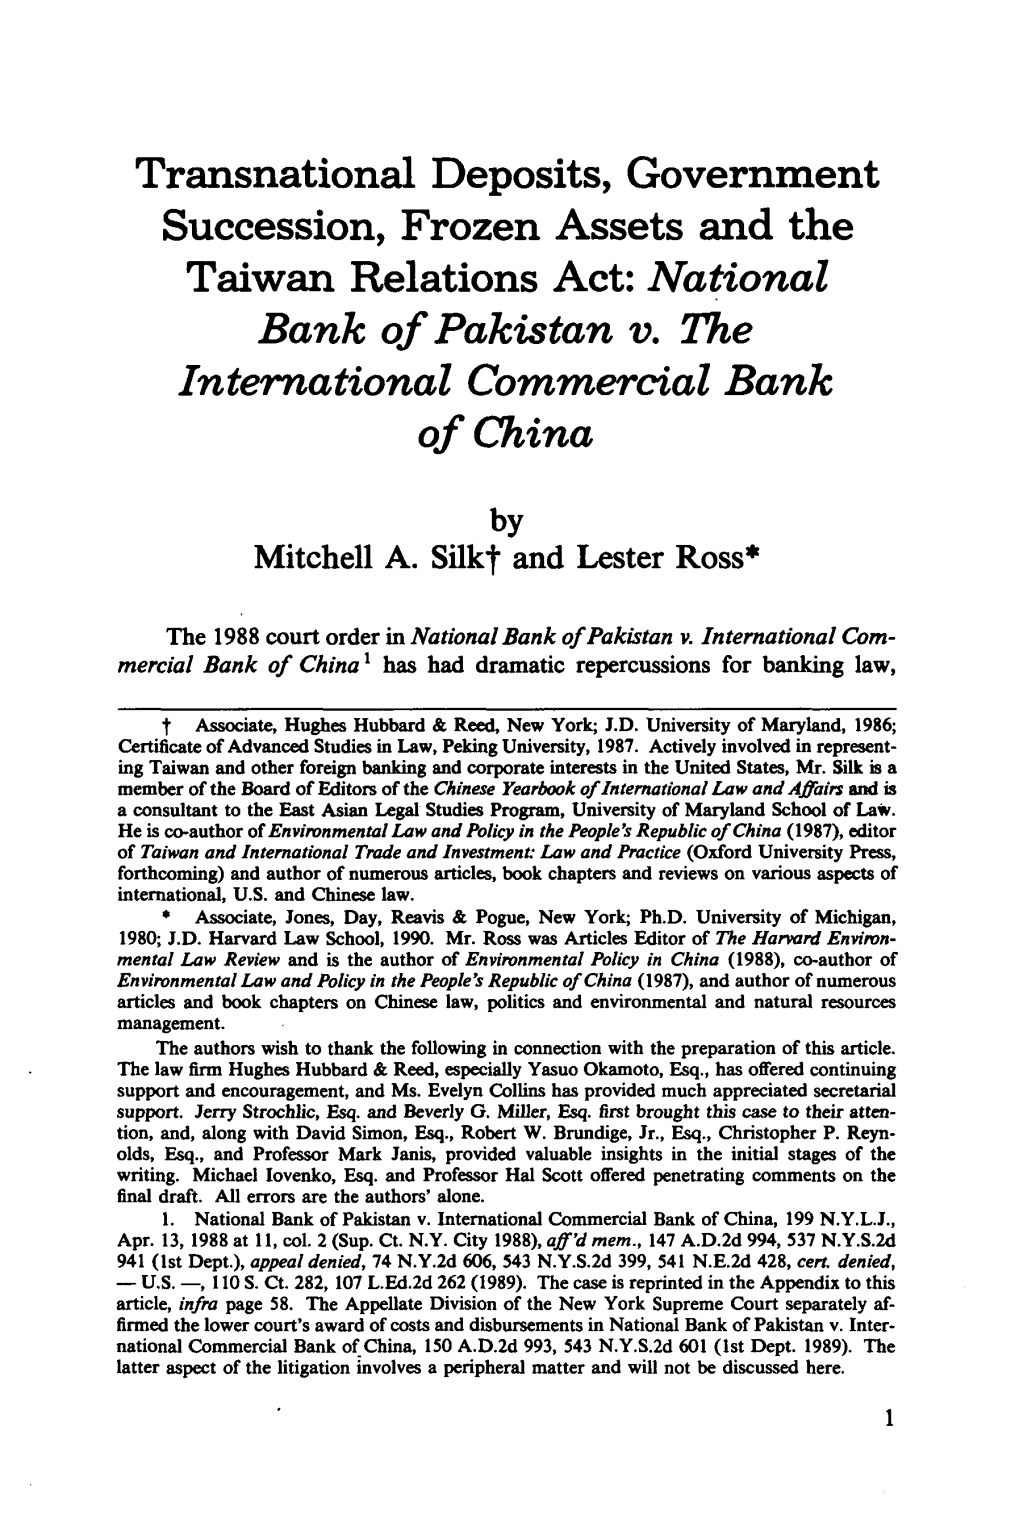 National Bank of Pakistan V. the International Commercial Bank of China